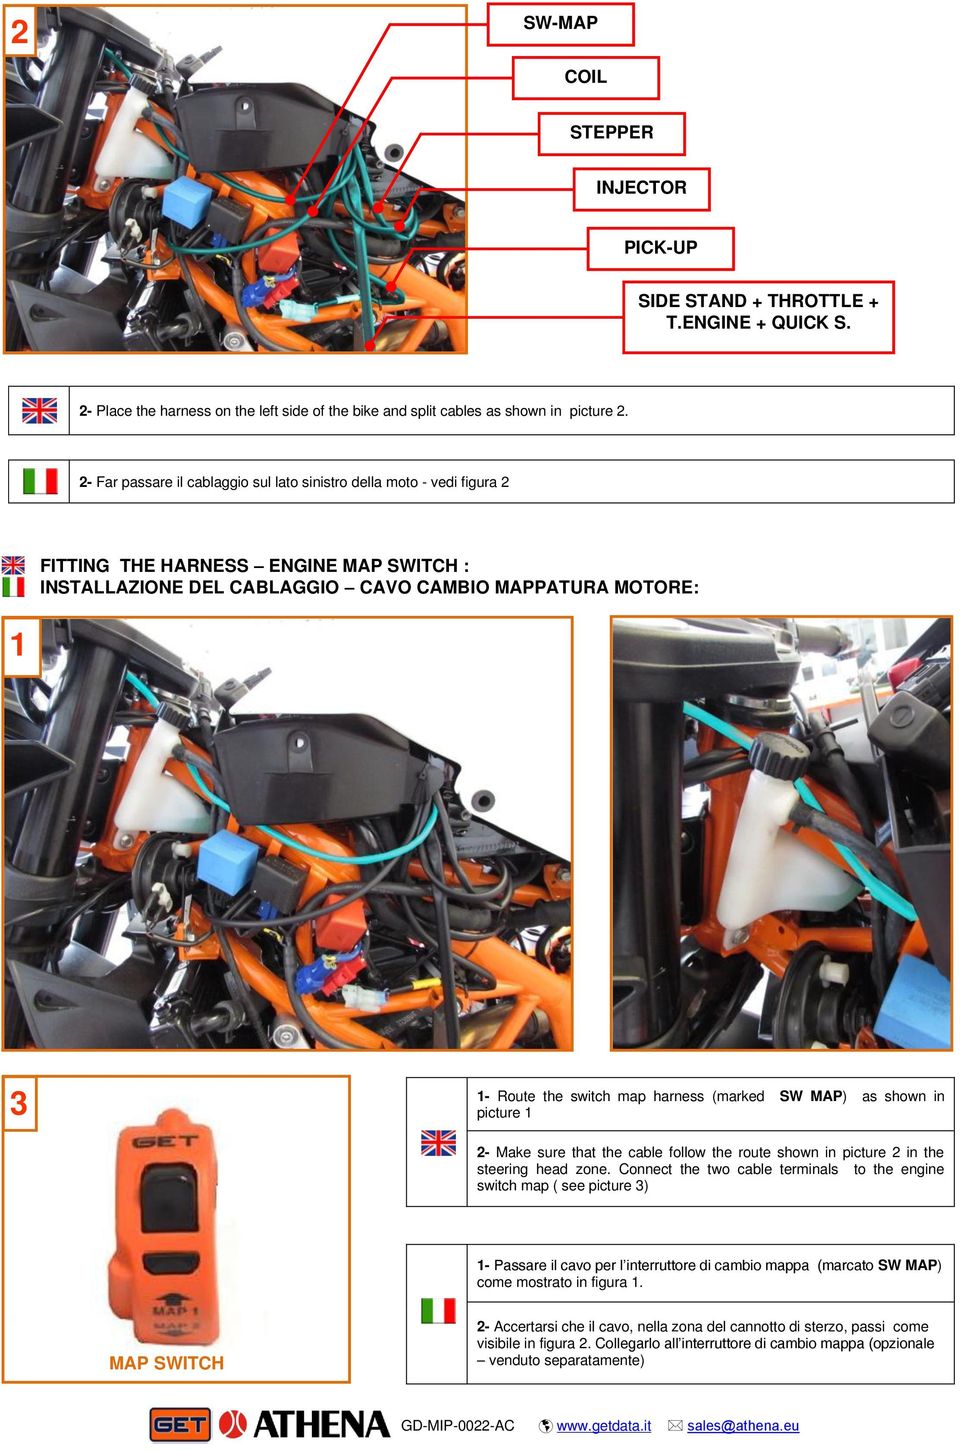 harness (marked SW MAP) as shown in picture 2- Make sure that the cable follow the route shown in picture 2 in the steering head zone.